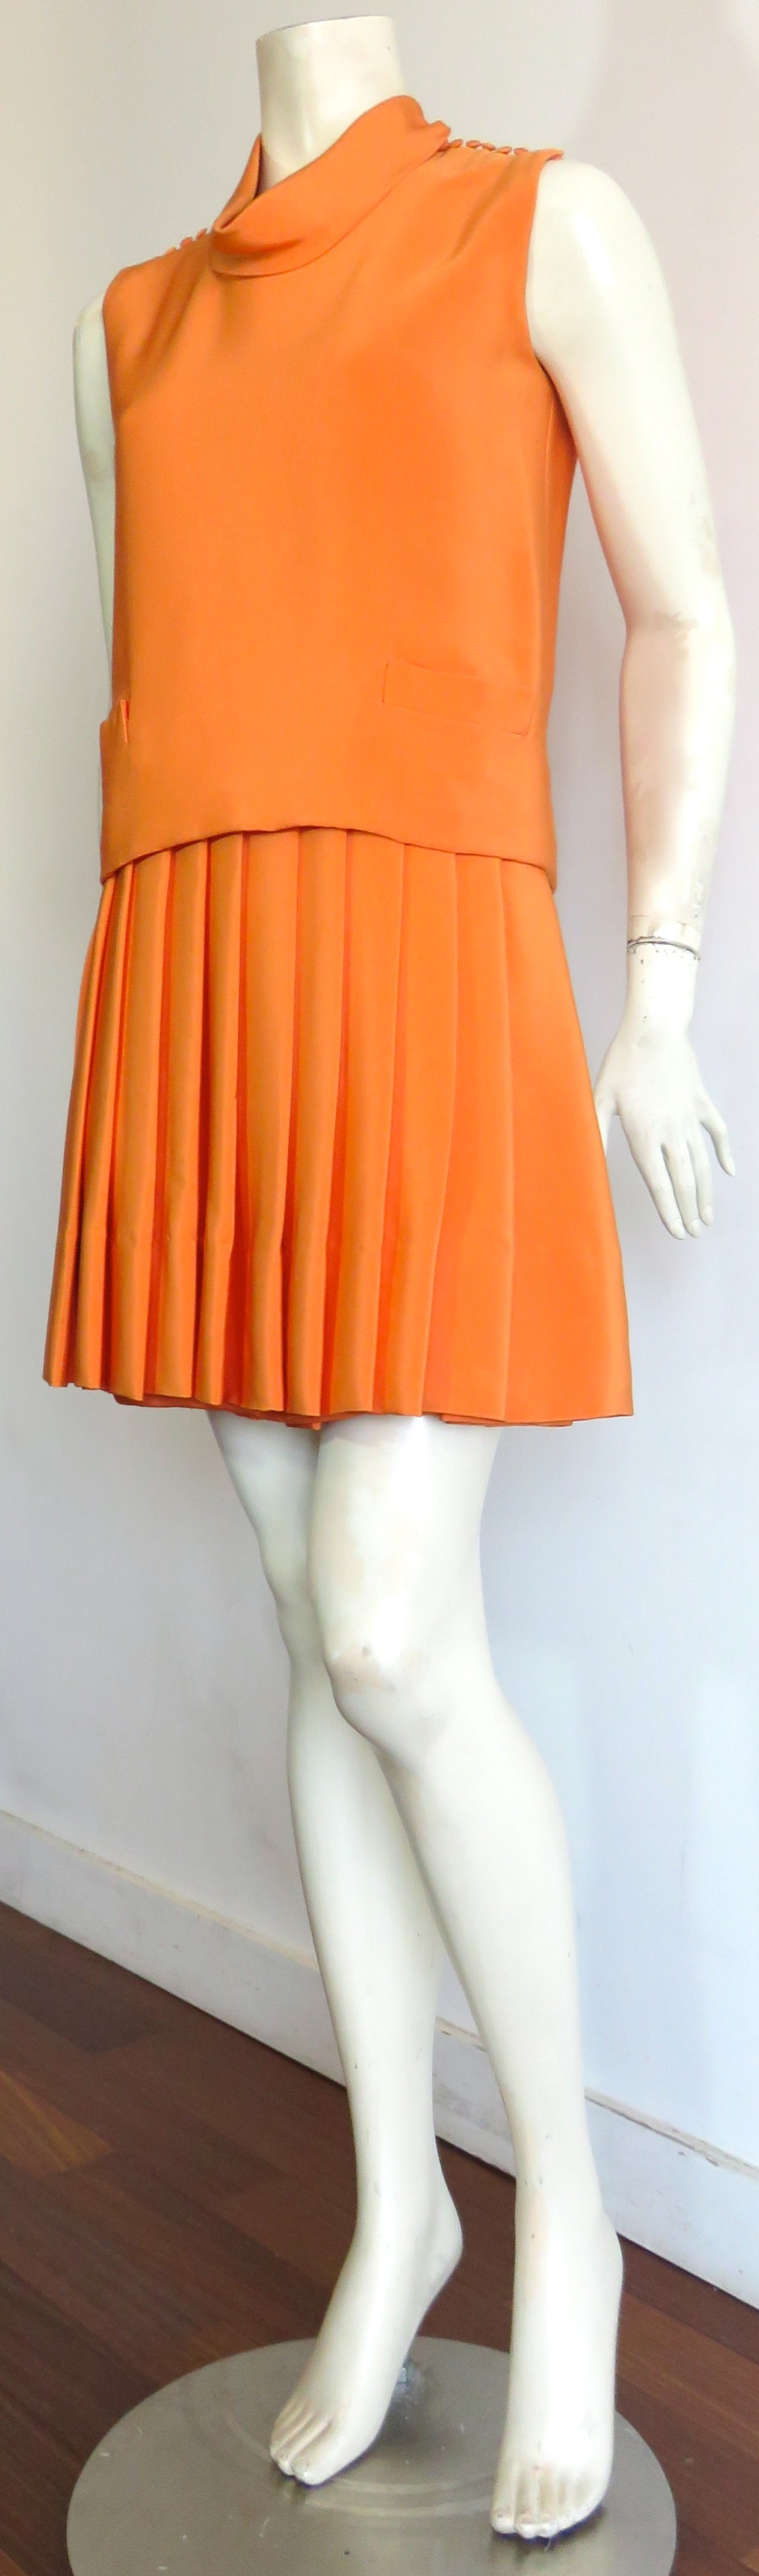 Very chic, 1960's, NORMAN NORELL 2pc. silk, knife-pleat dress set.

Acquired from the original owner, and in excellent condition with no damages.

Beautifully constructed set consisting of knife-pleated, silk under dress, and top bodice with